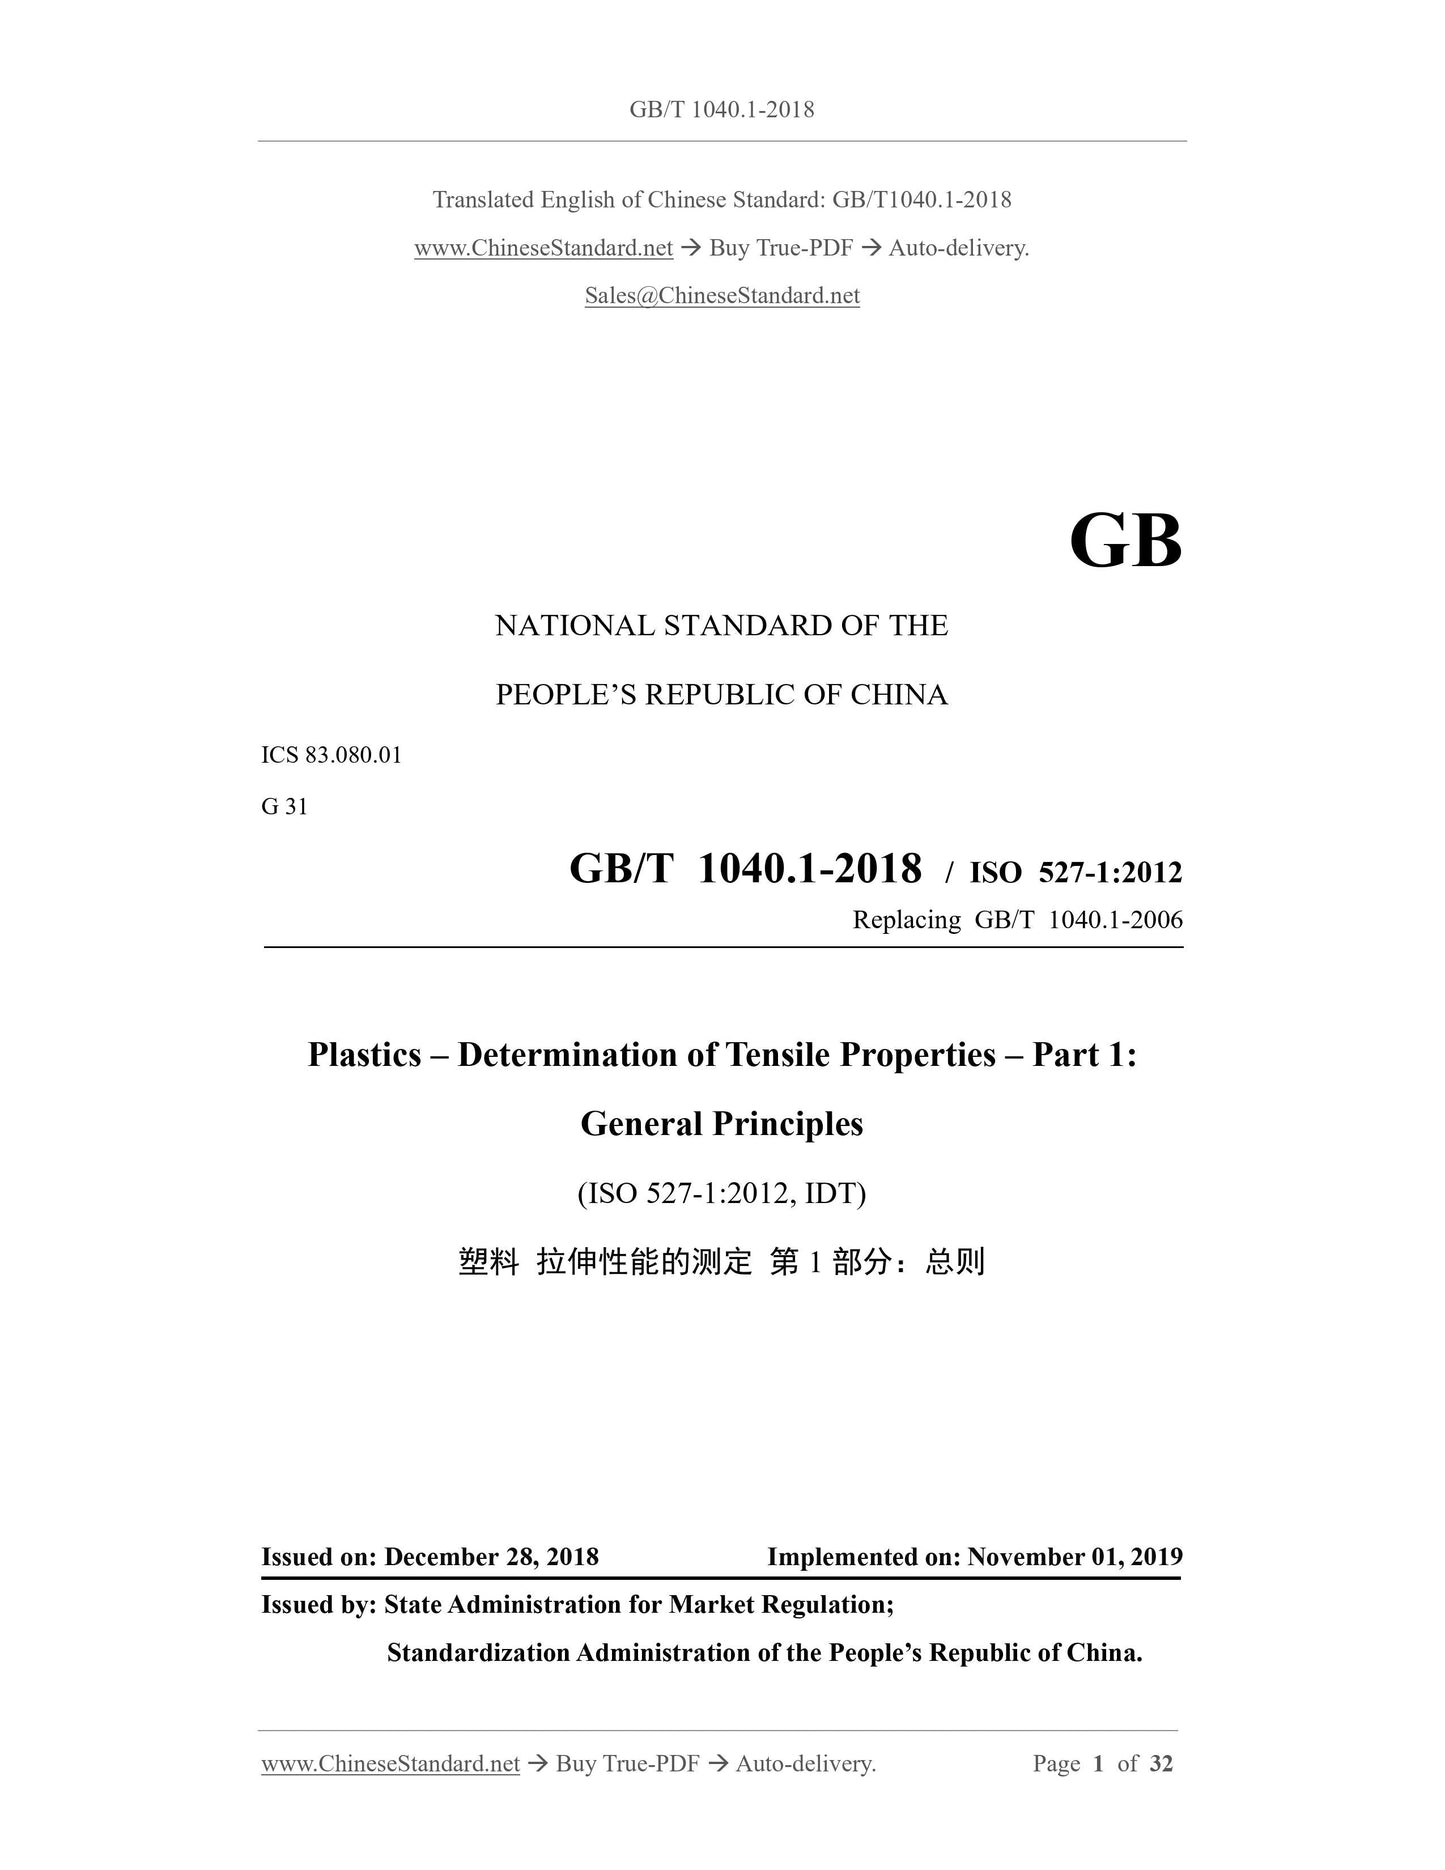 GB/T 1040.1-2018 Page 1